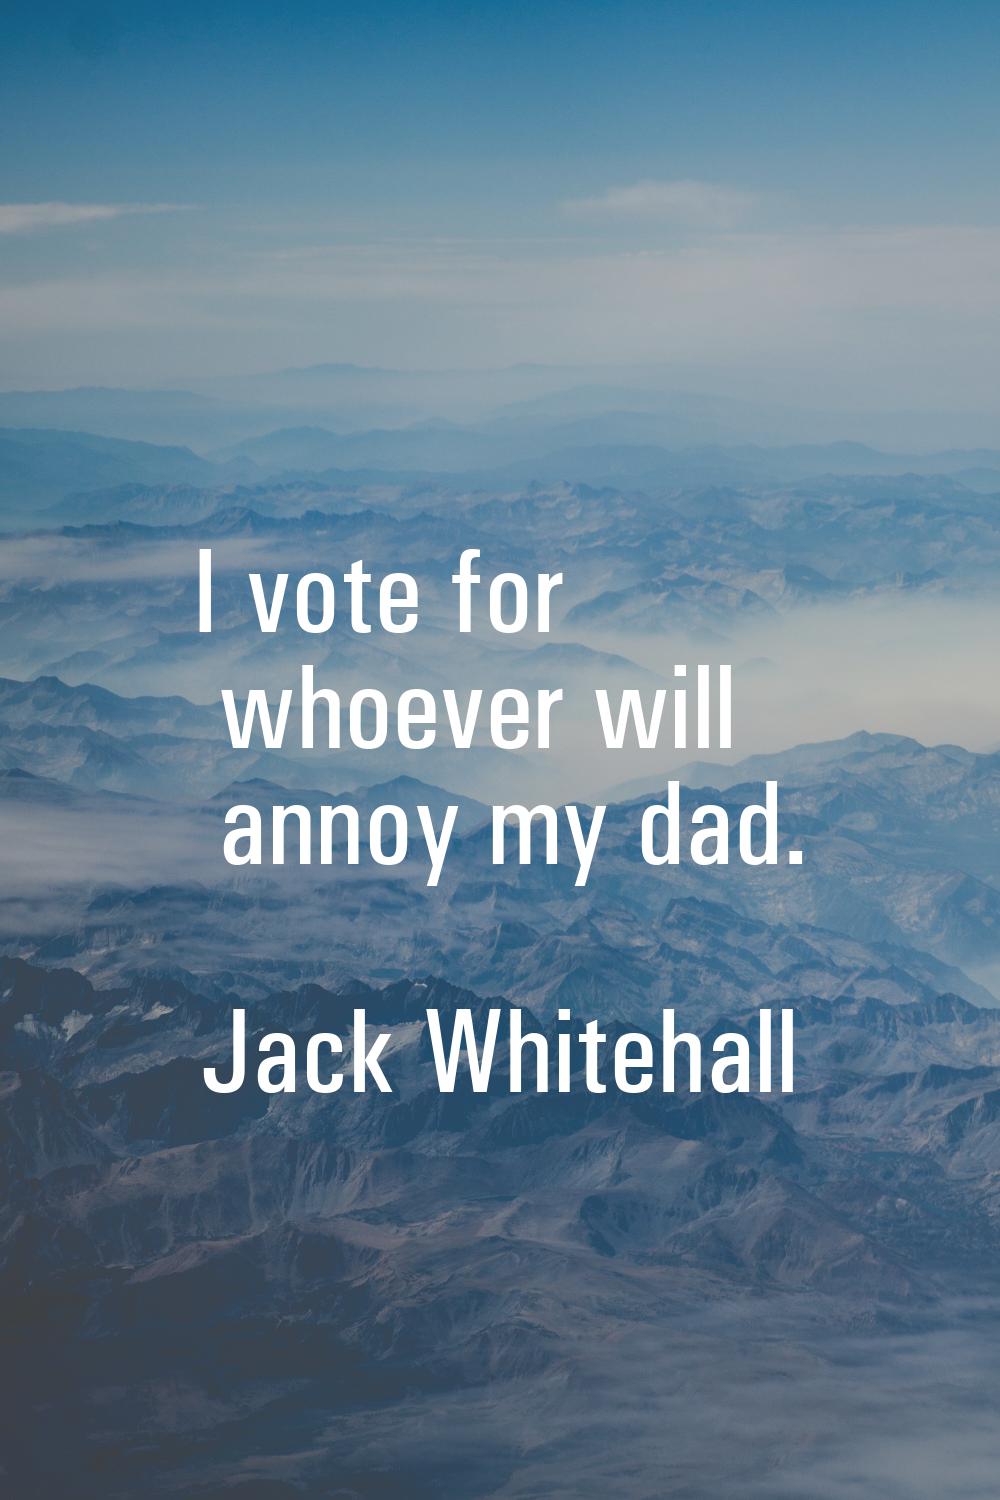 I vote for whoever will annoy my dad.